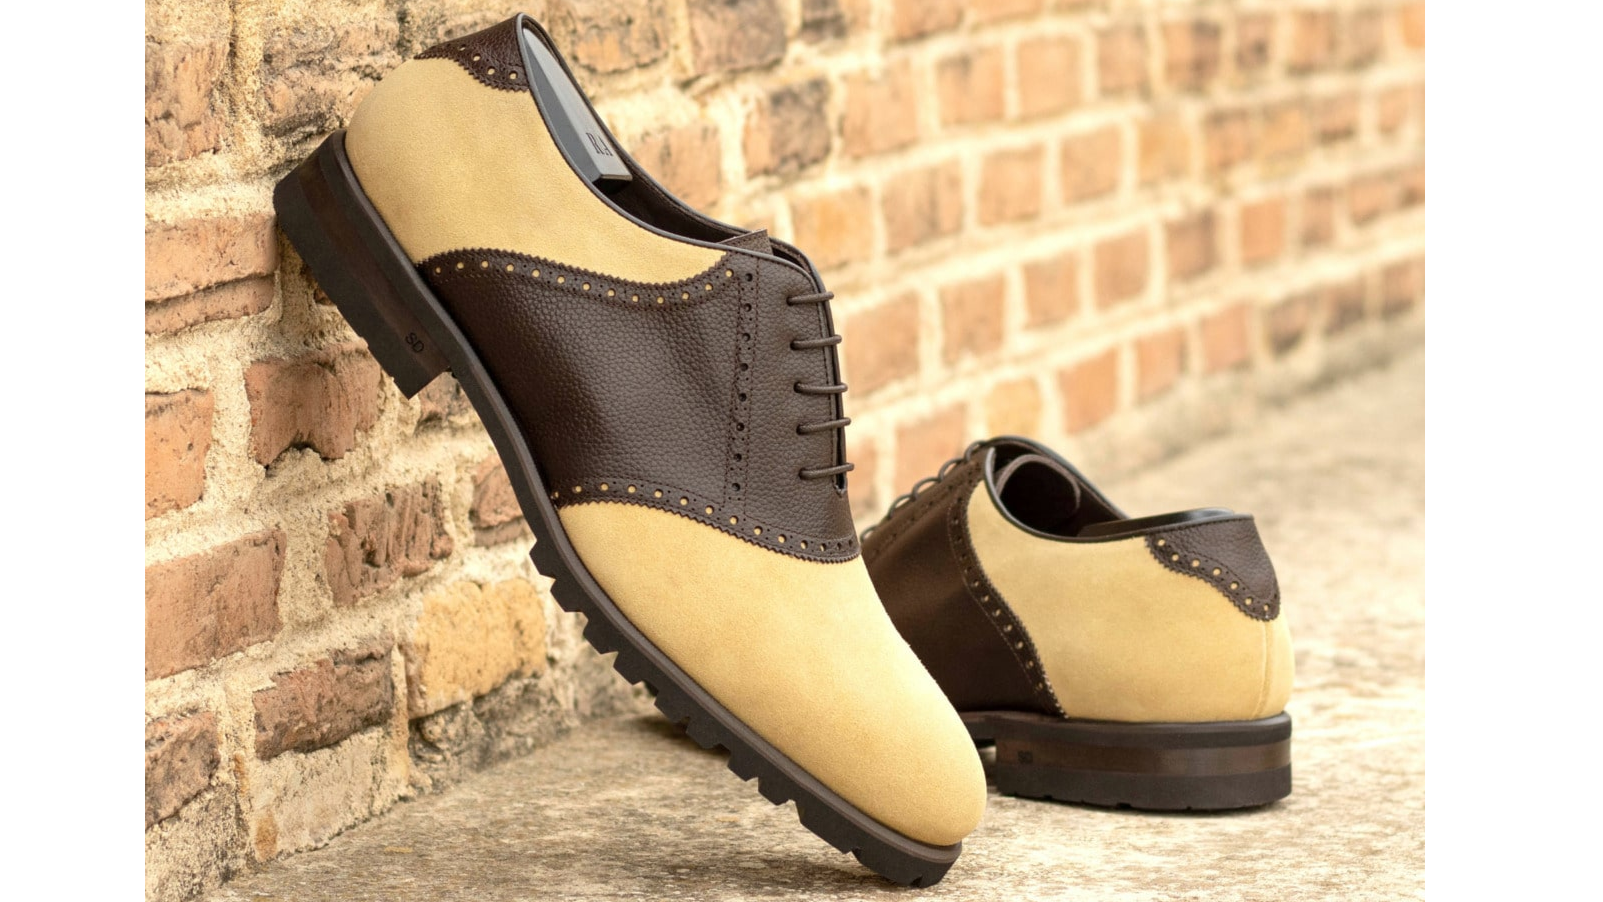 Get A Handmade Luxury Leather Saddle Shoe For Mid-Century Collegiate Cool